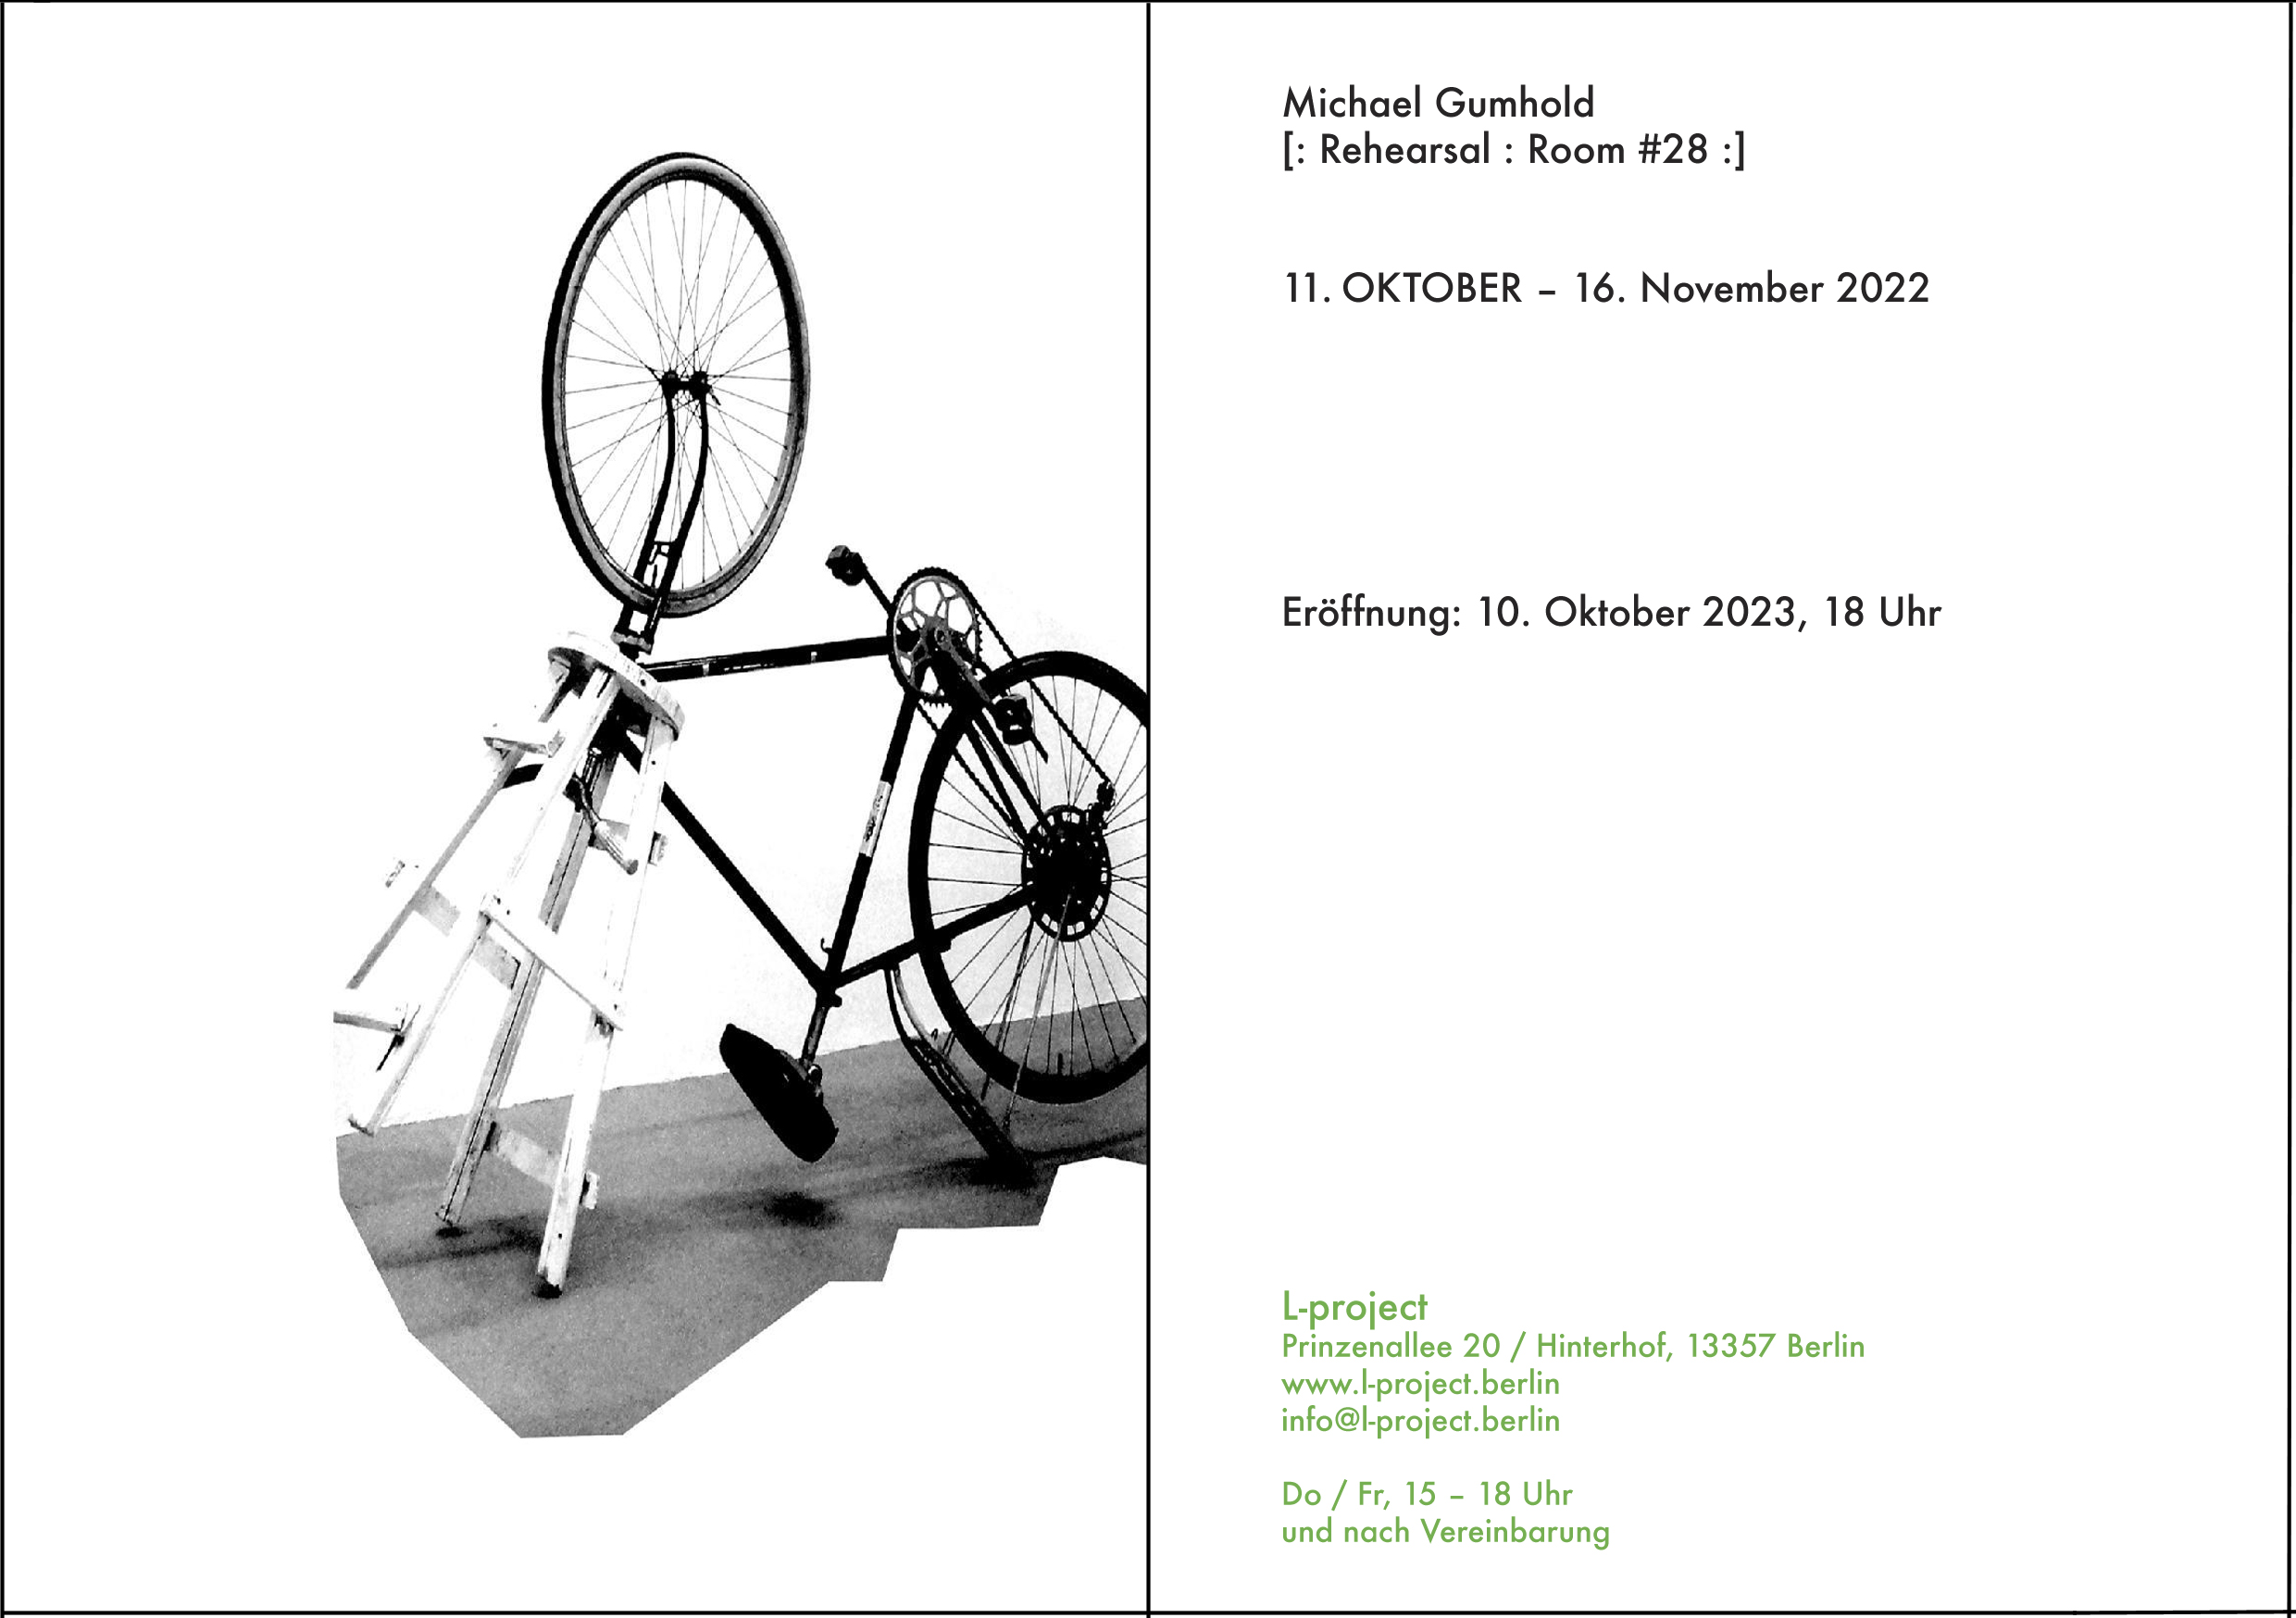 Michael Gumhold at L-project